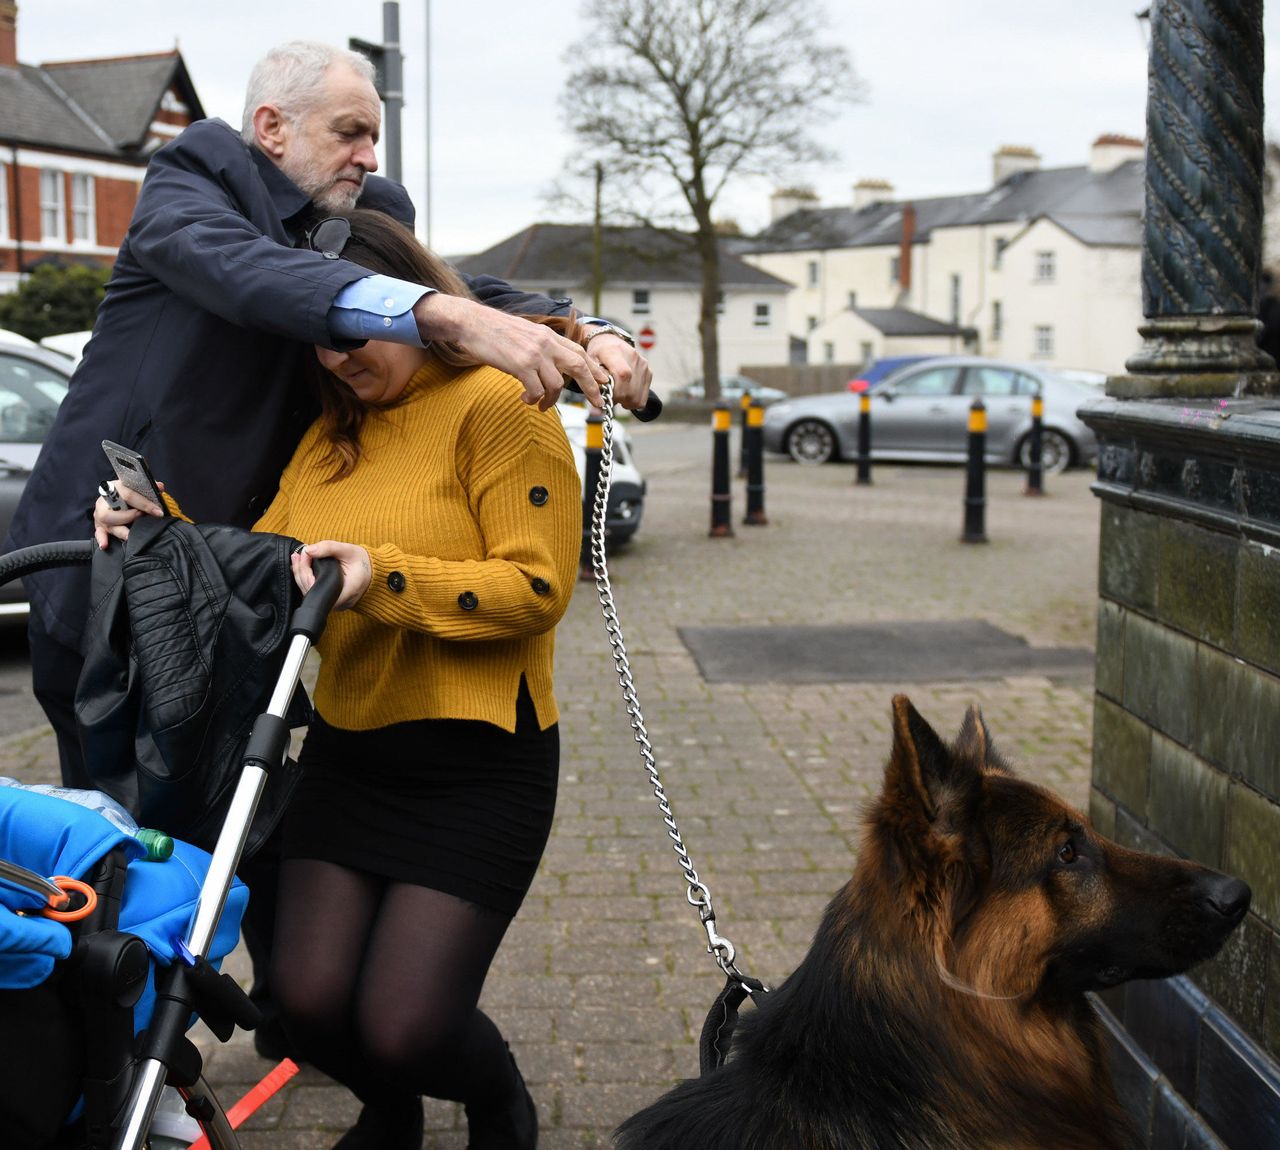 Corbyn was seen posing for photographs in the centre of Newport on Friday.